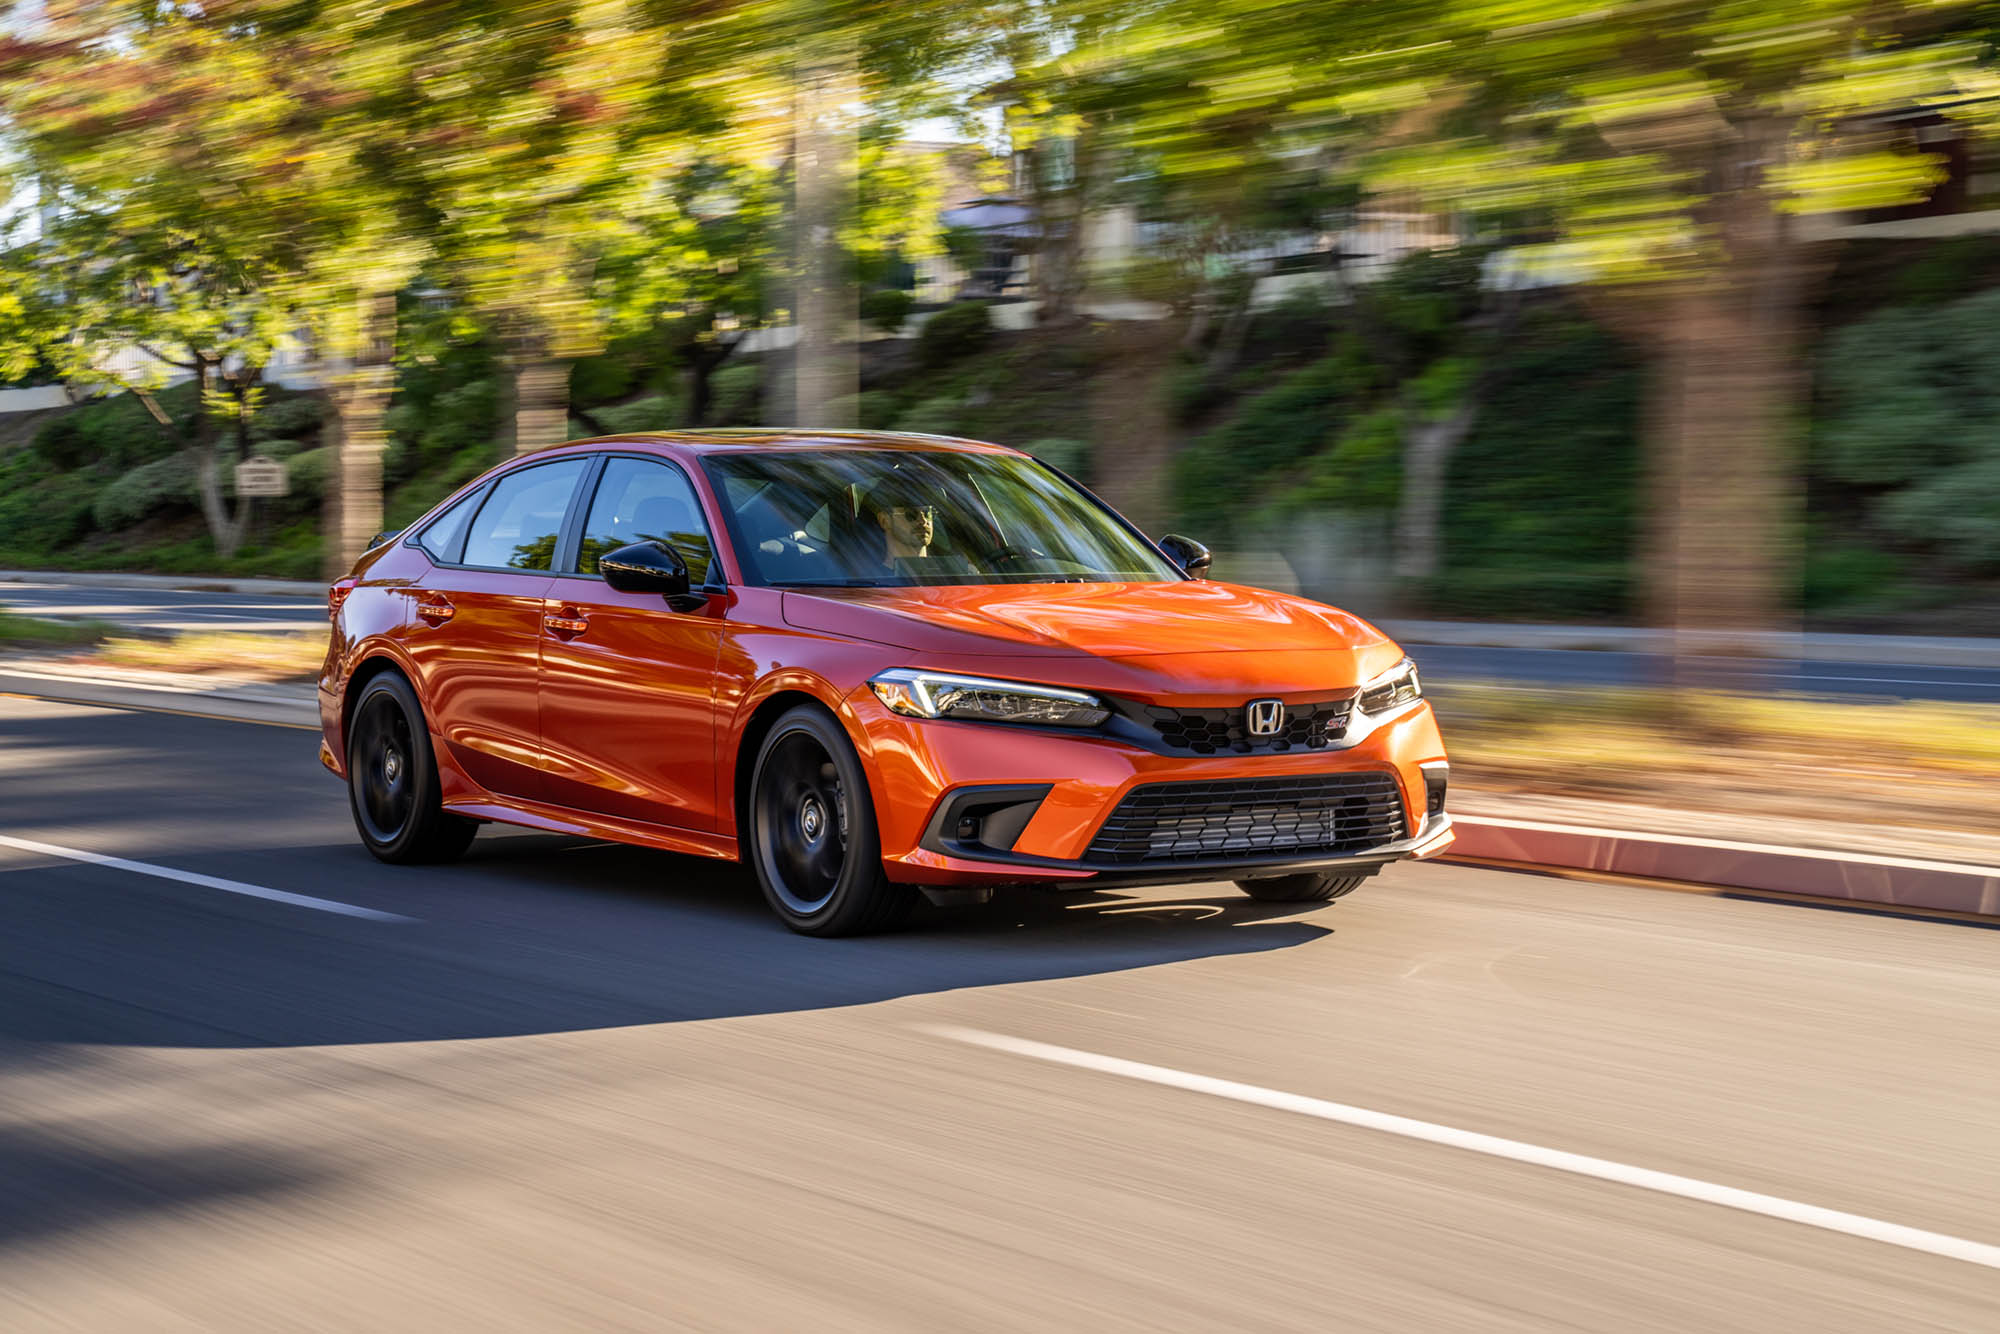  Red-orange current-generation Honda Civic driving on paved road